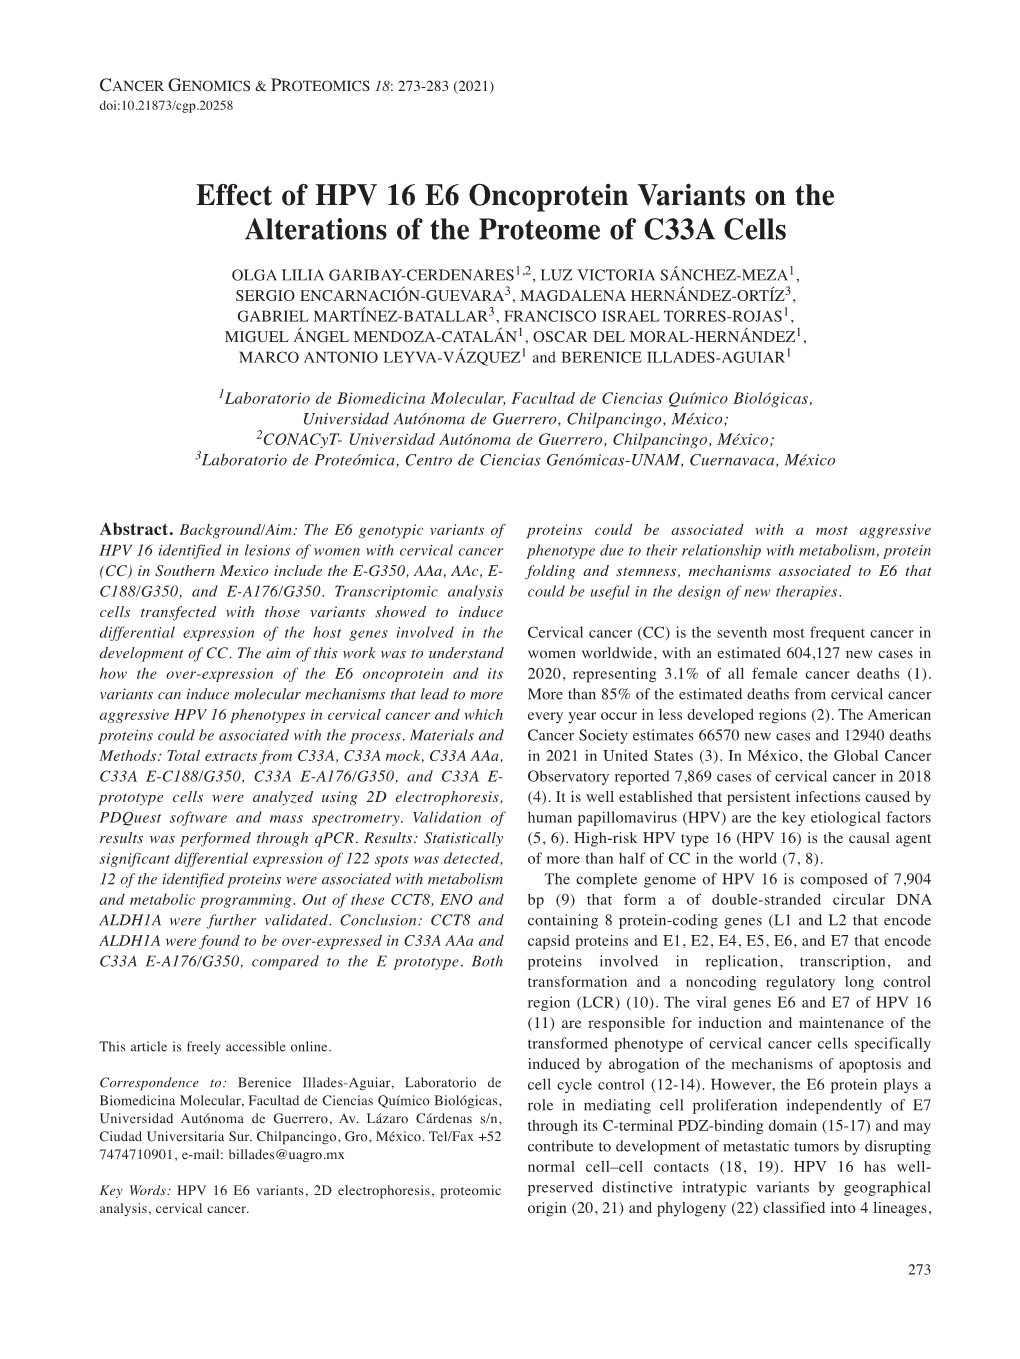 Effect of HPV 16 E6 Oncoprotein Variants on the Alterations of The